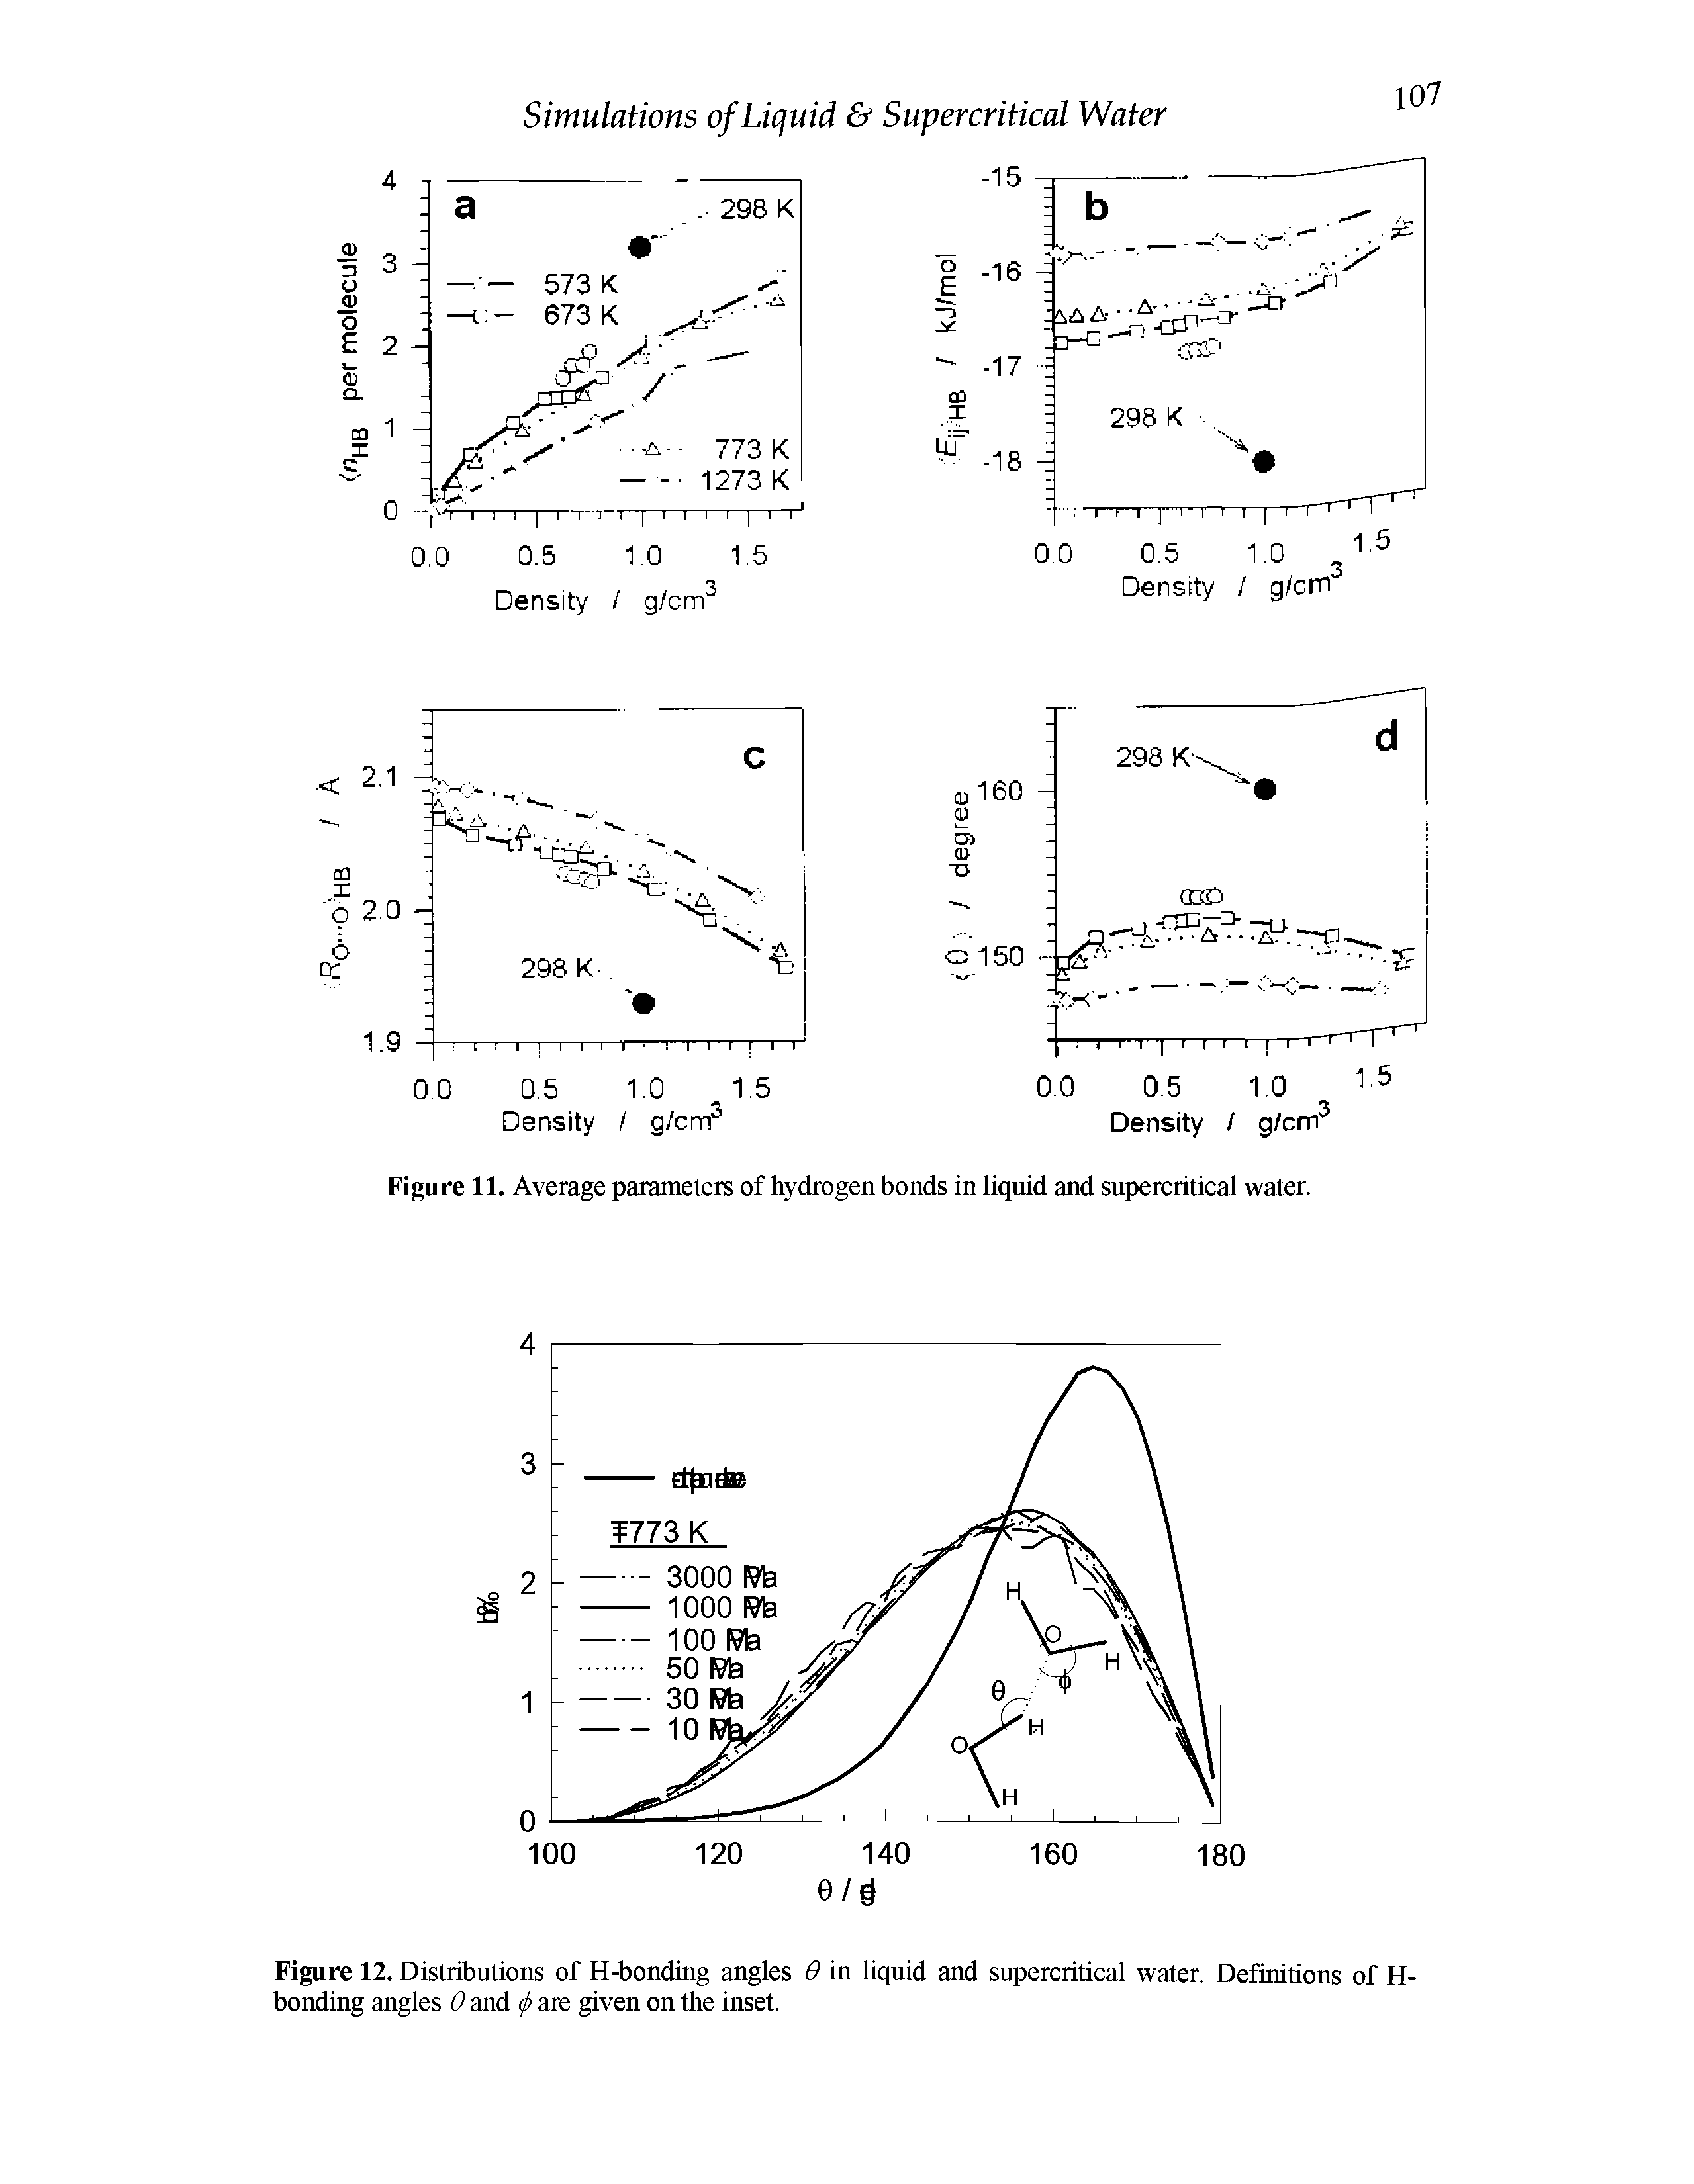 Figure 12. Distributions of H-bonding angles 0 in liquid and supercritical water. Definitions of H-bonding angles 0 and < > are given on the inset.